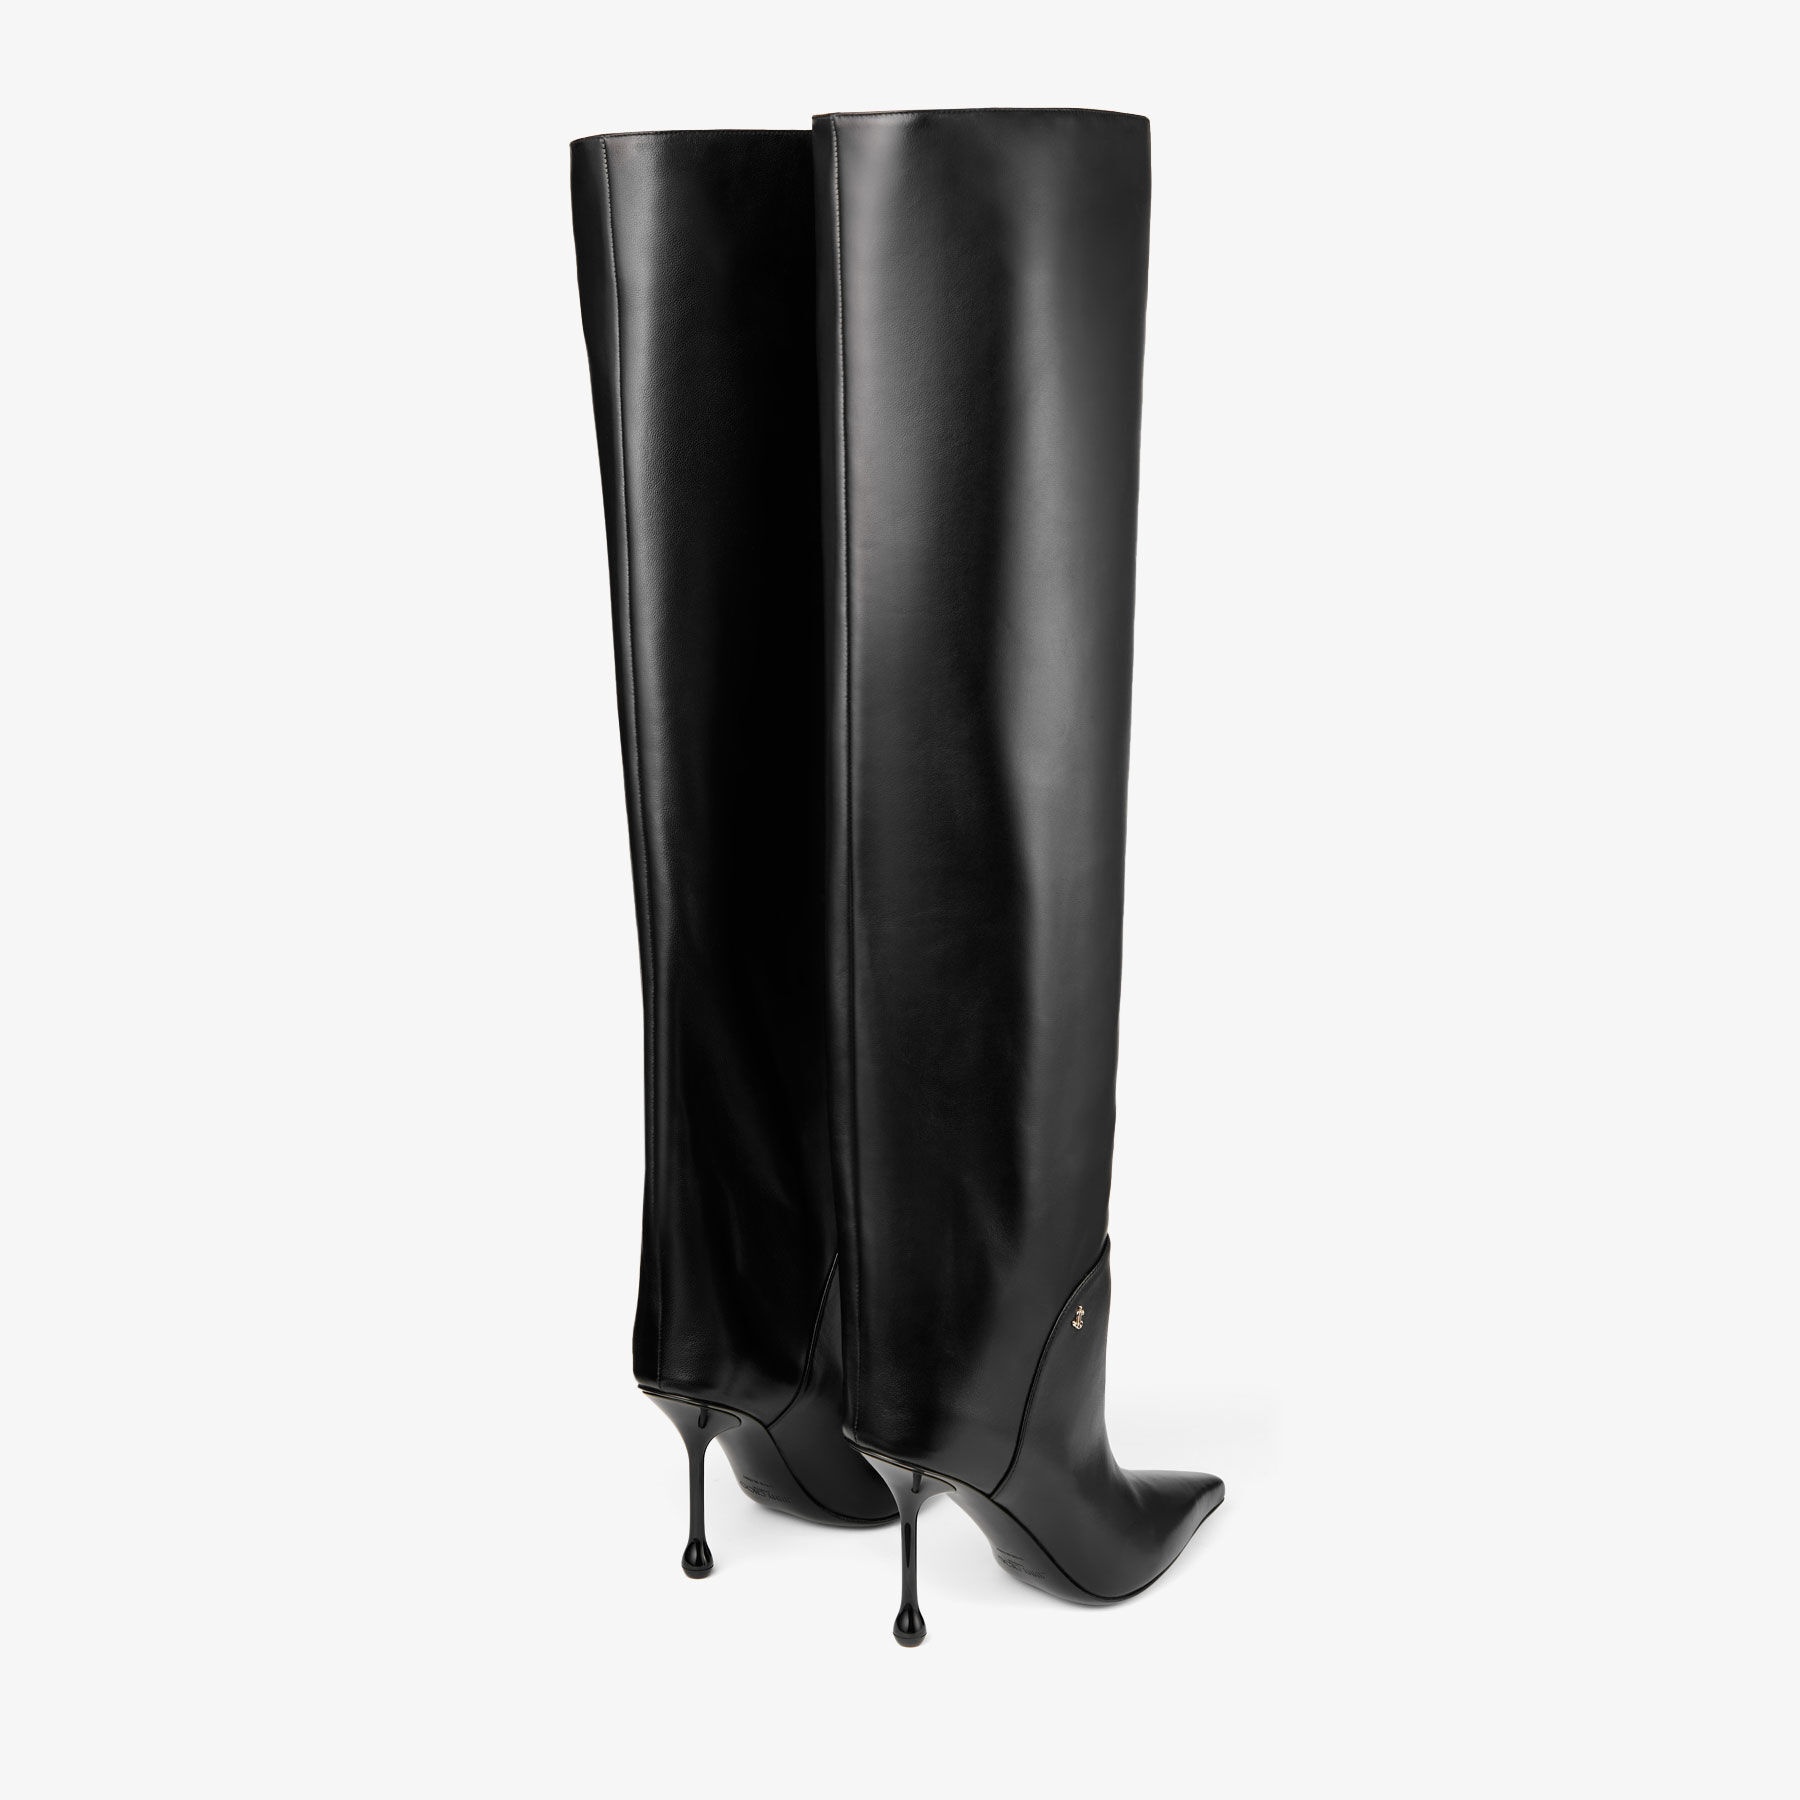 Cycas Knee Boot 95
Black Nappa Leather Knee-High Boots - 6